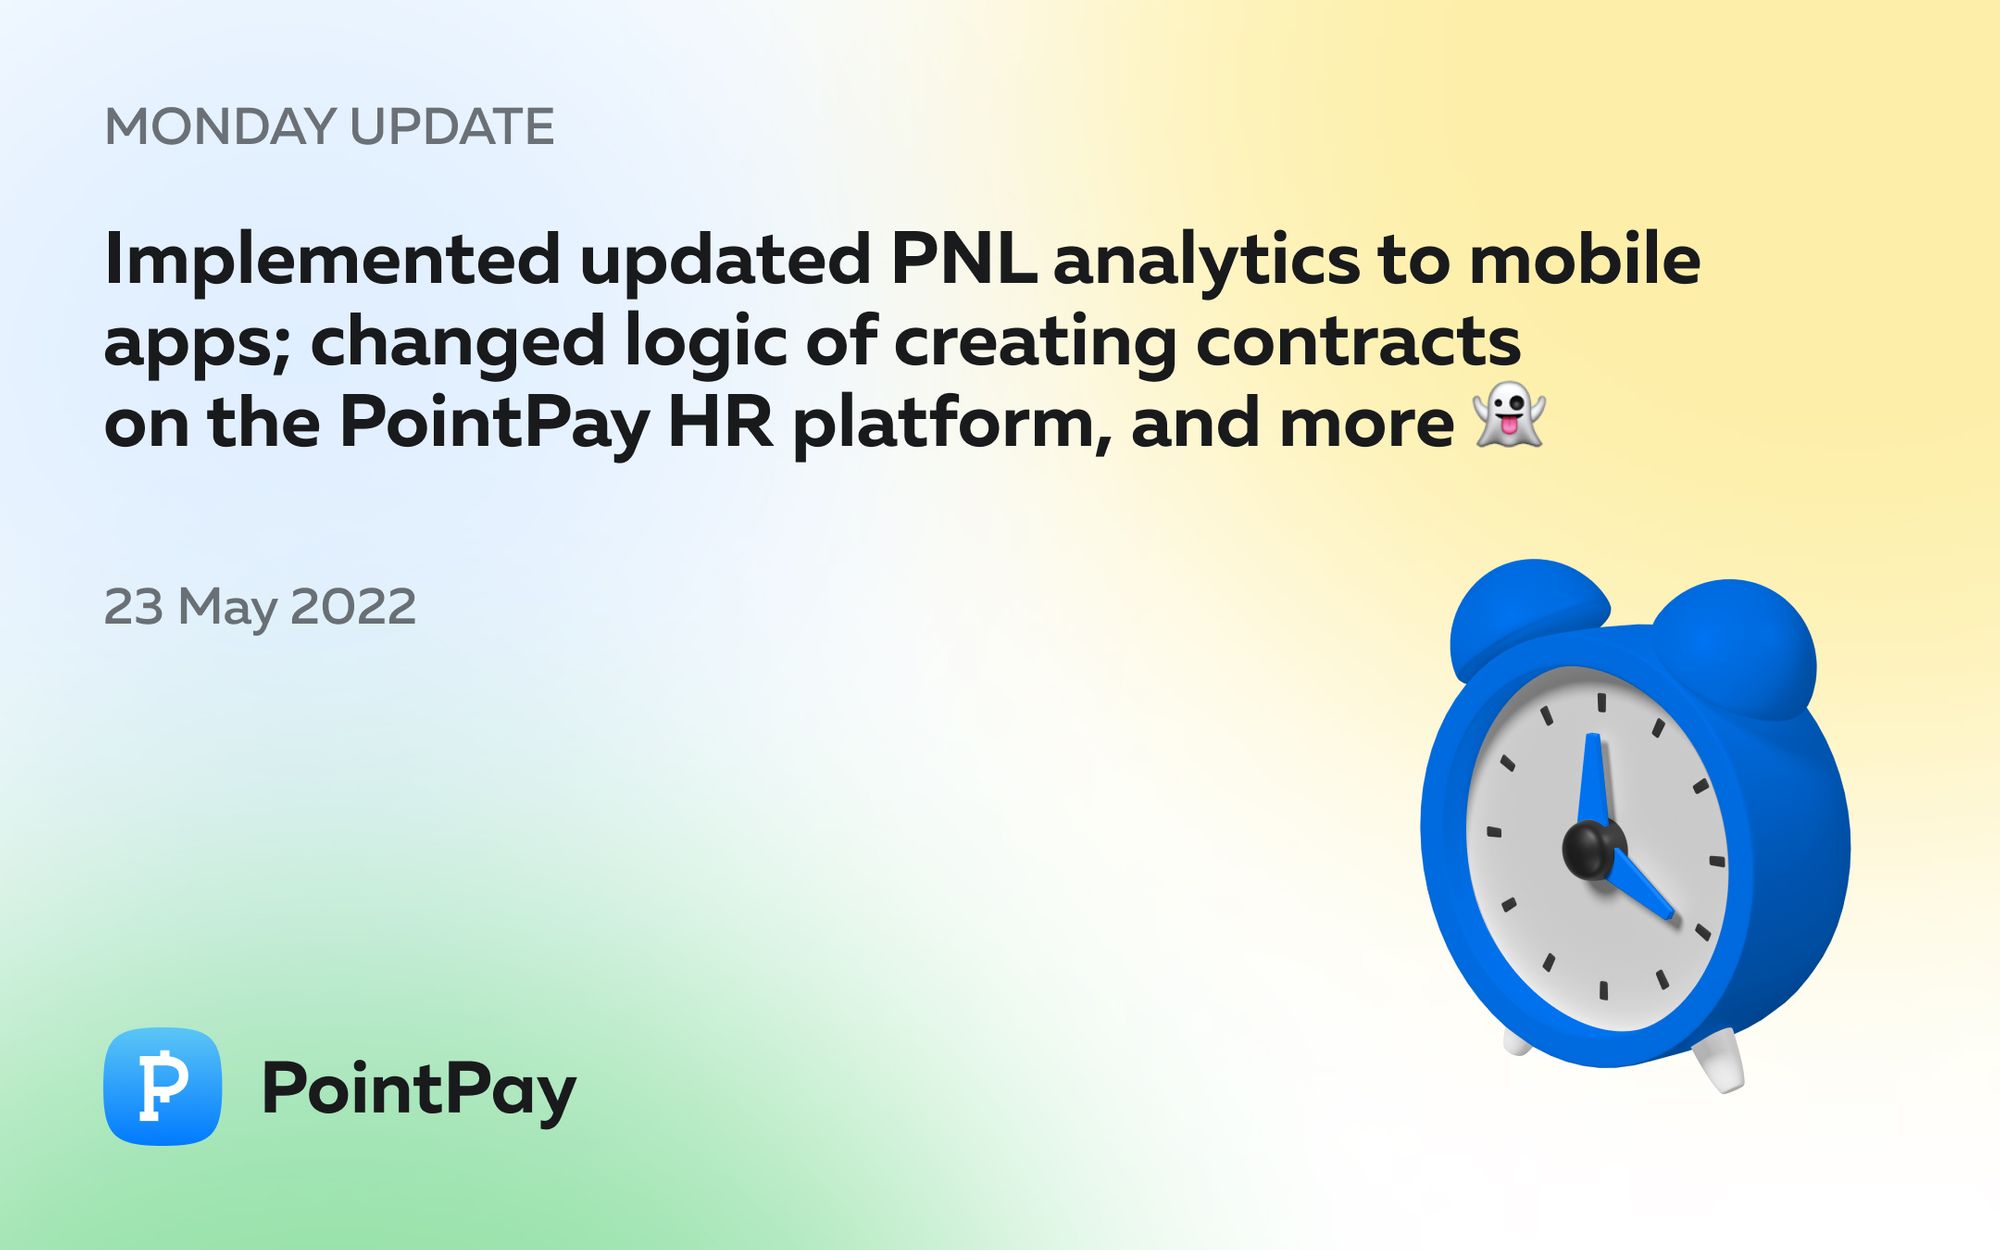 Monday update from PointPay